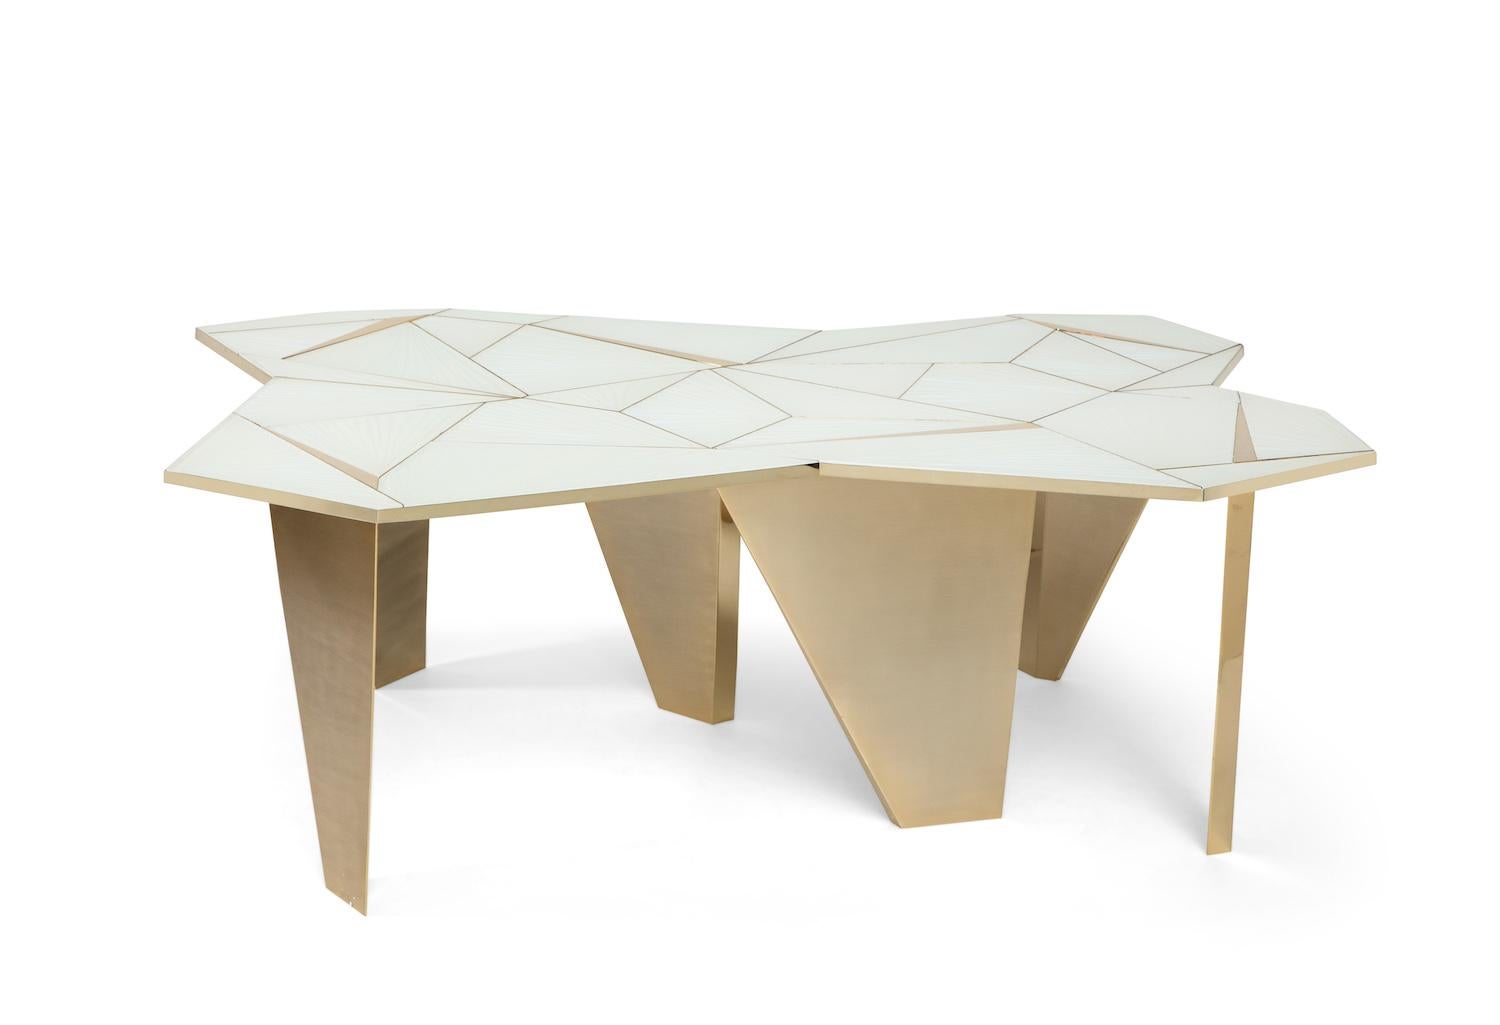 Studio-built table of hand carved glass panels set into brass framing & colored with a unique iridescent treatment. Irregular brass legs that come up through the top, creating abstract triangular surface details. Limited edition of 12, plus 2 artist